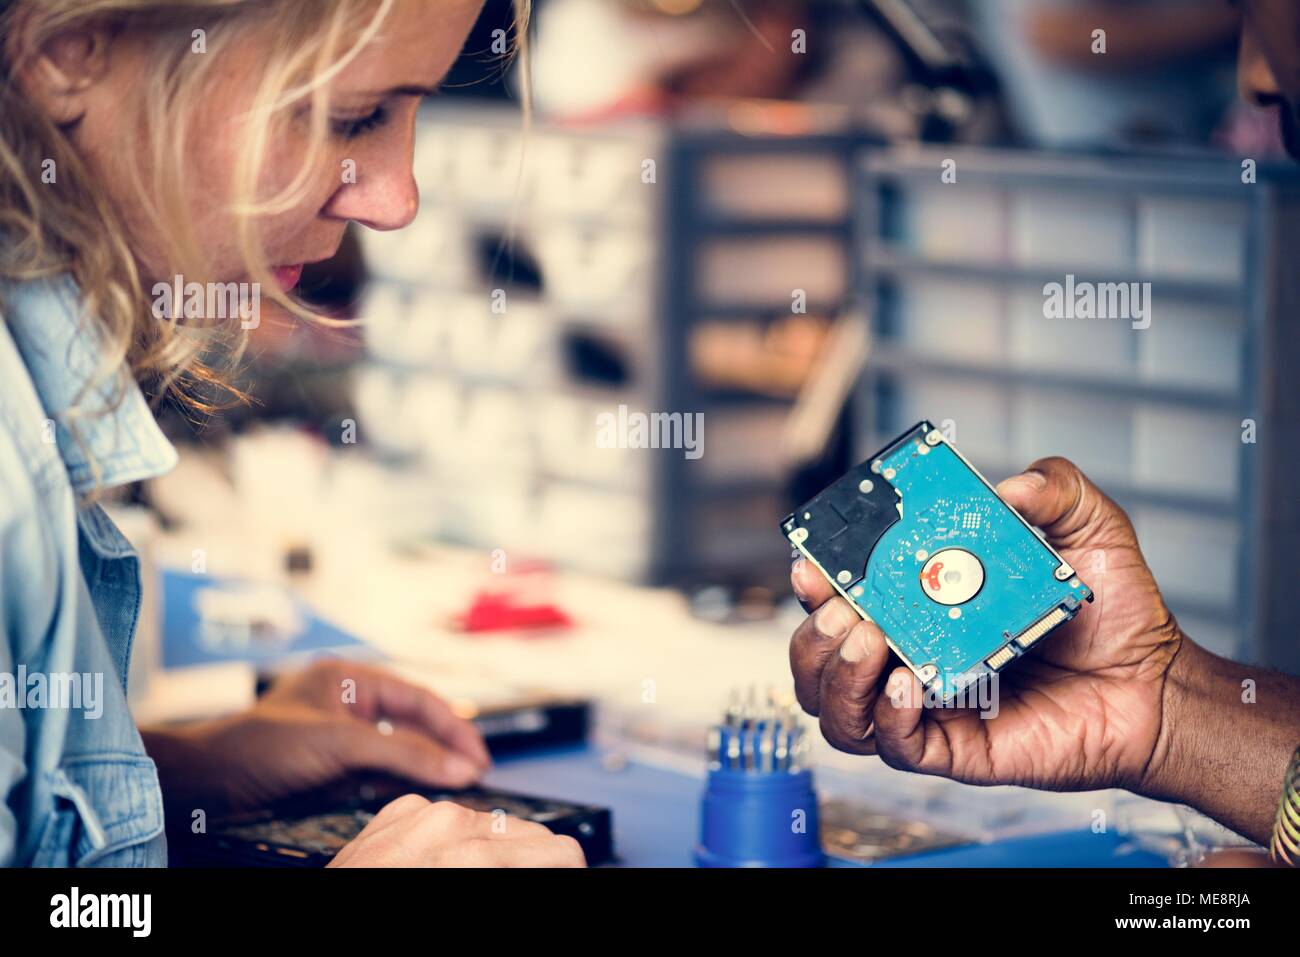 Technicians working on computer hard disk Stock Photo